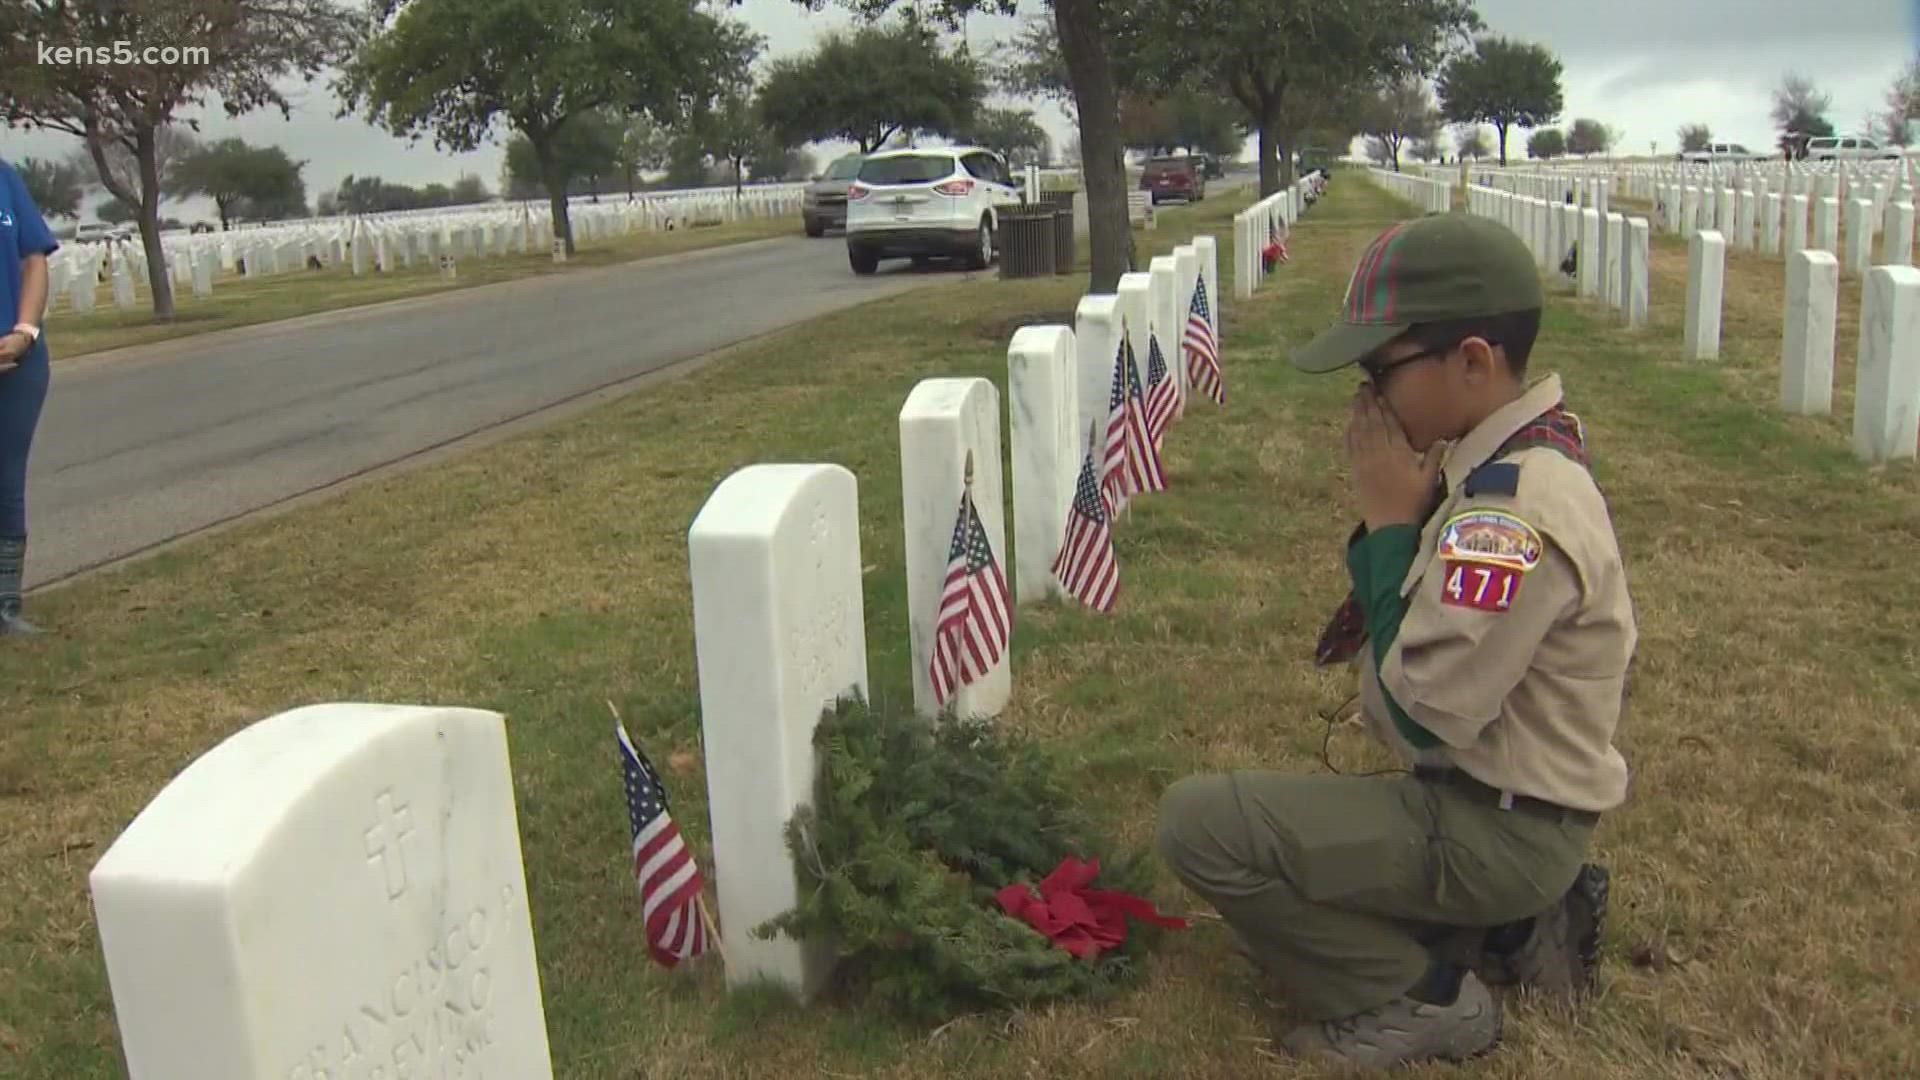 Volunteers are at Fort Sam Houston National Cemetery laying wreaths on more than 167,000 headstones.